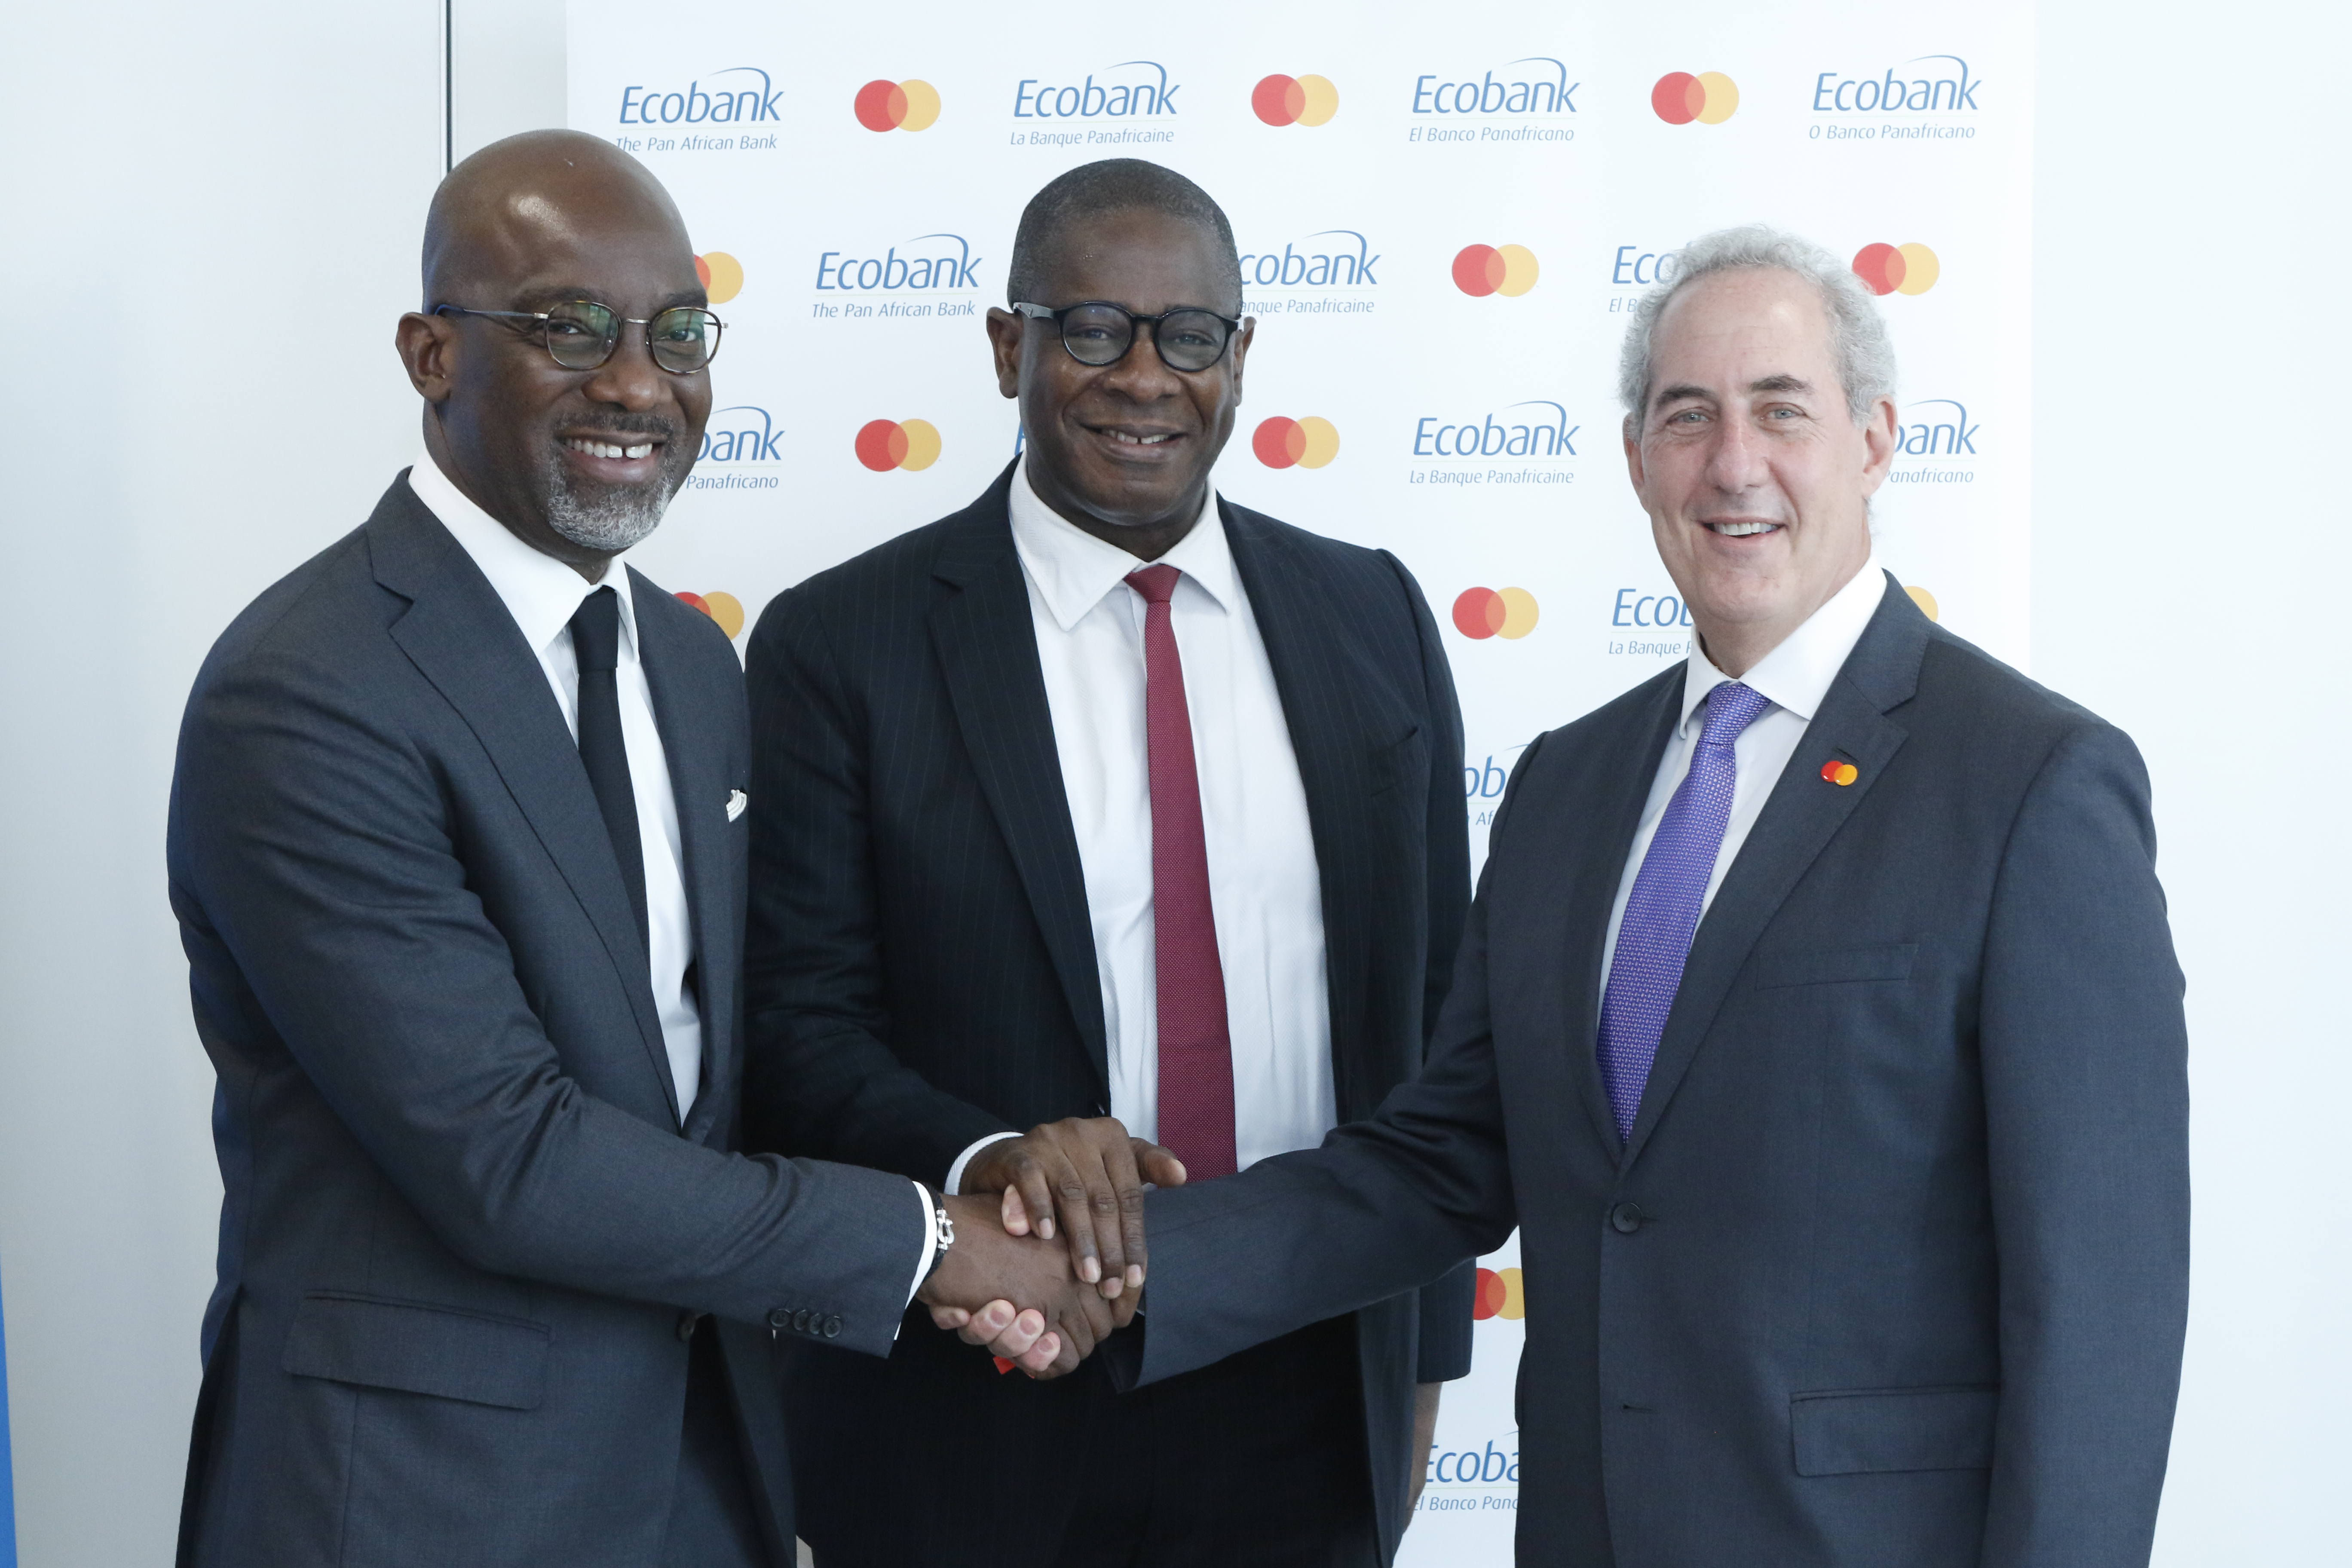 Harry Aithnard, Regional Executive Director of UEMOA, Ecobank (left), Solomon Quaynor, Vice President for Private Sector, Infrastructure and Industrialization, African Development Bank Group (centre) and Michael Froman, Vice Chairman and President, Strategic Growth for Mastercard (right), at the signing ceremony of Mastercard’s Farm Pass partnership agreement with Ecobank Group held on the sidelines of the Africa CEO Forum in Abidjan, Cote d’Ivoire